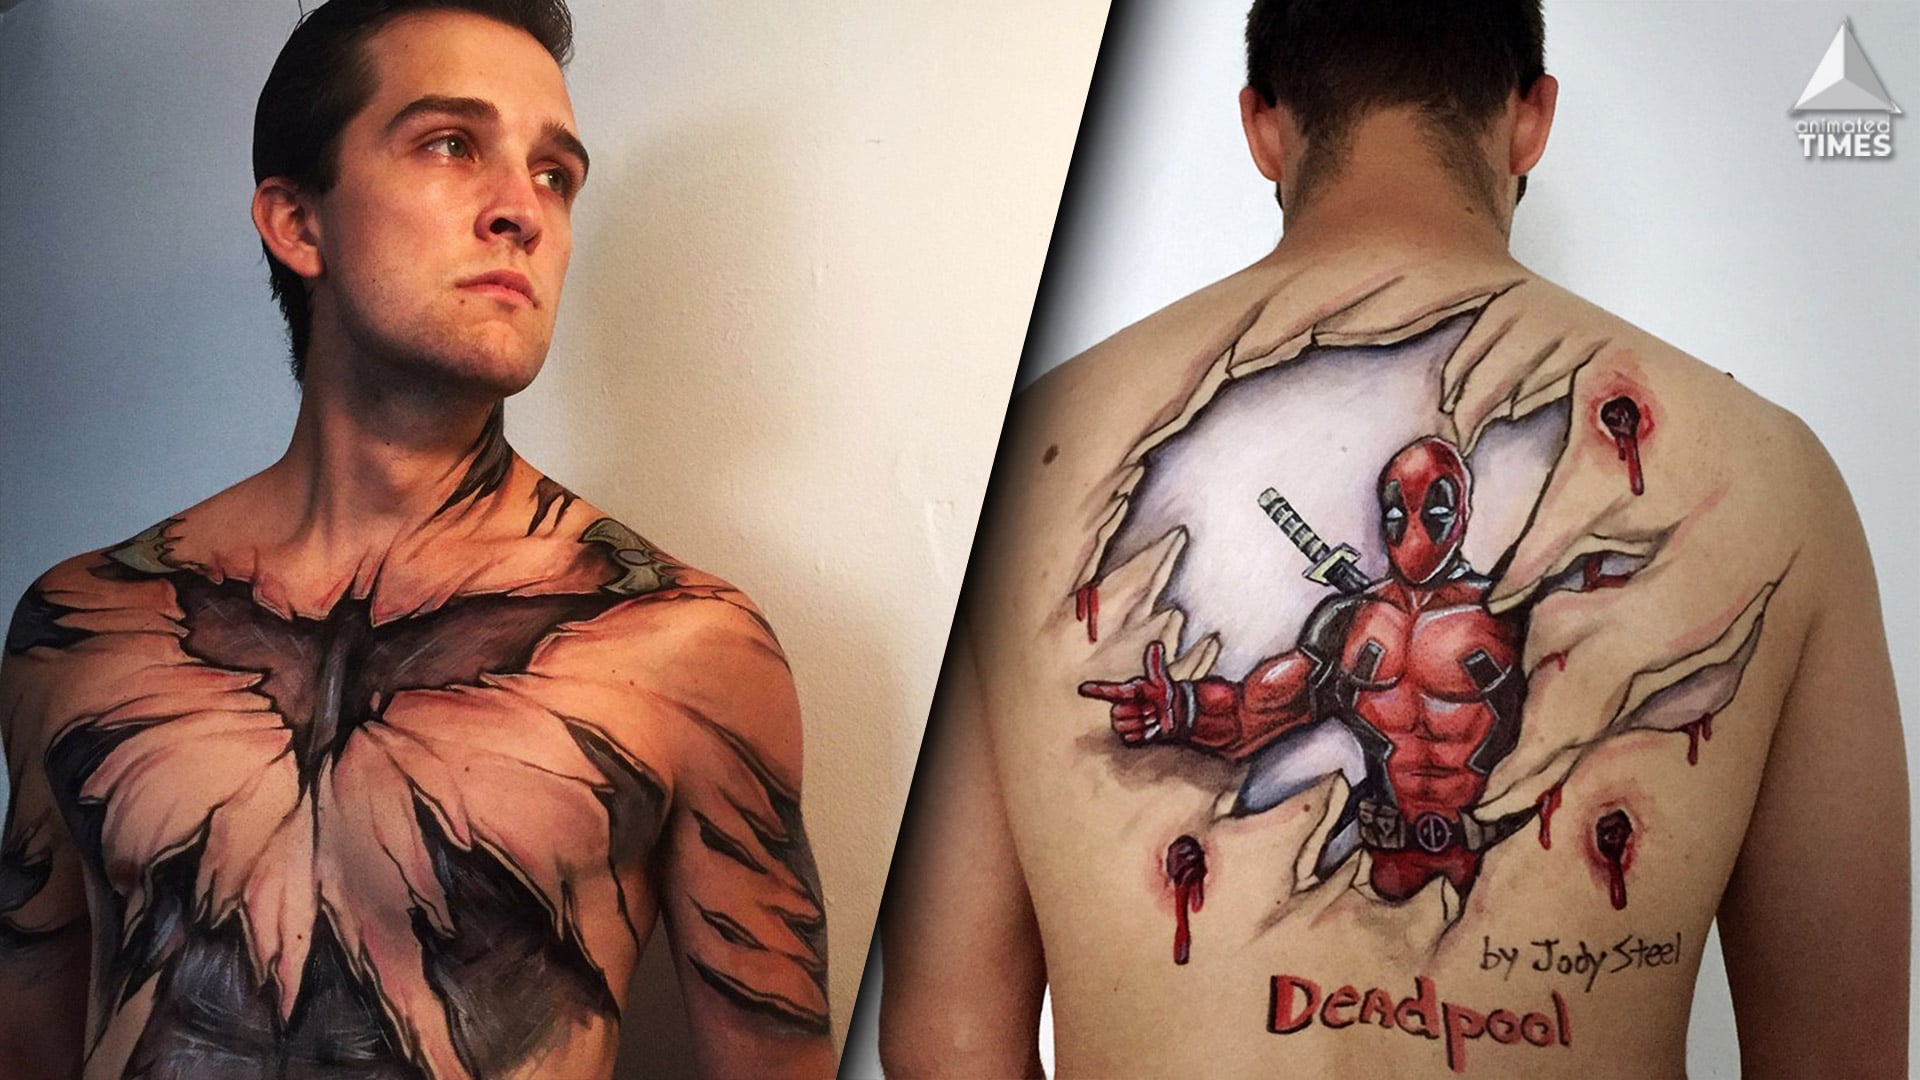 Body Paint Artist Uses Bodies as Canvas, Reveals The Superheroes Within Us All